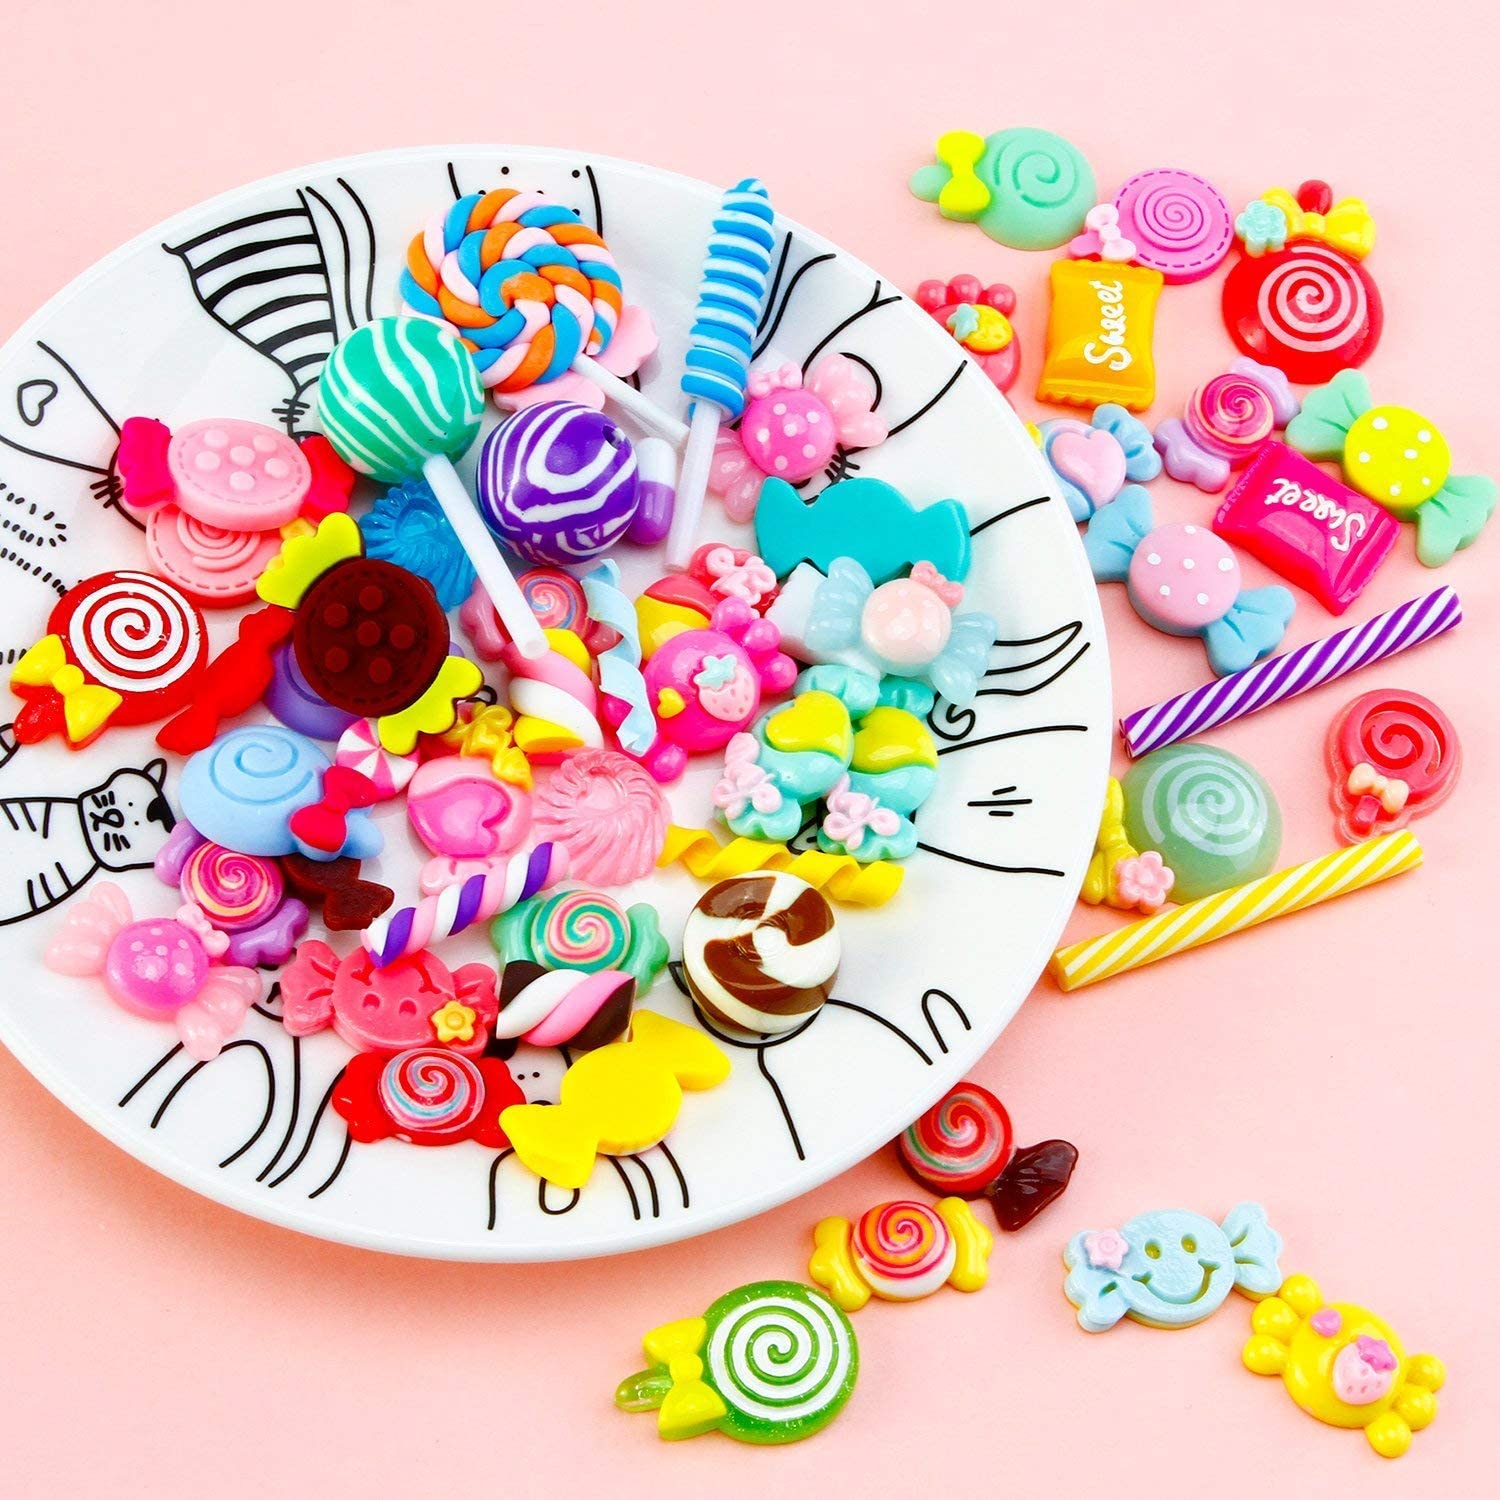 EIMELI 60 Pieces Slime Charms Set Candy Sweets Charms Mixed Flatback Resin Charms for Slime DIY Crafts Accessories Scrapbooking Slime Charms Mixed Resin Flatback Slime Beads Making Supplies - image 2 of 8